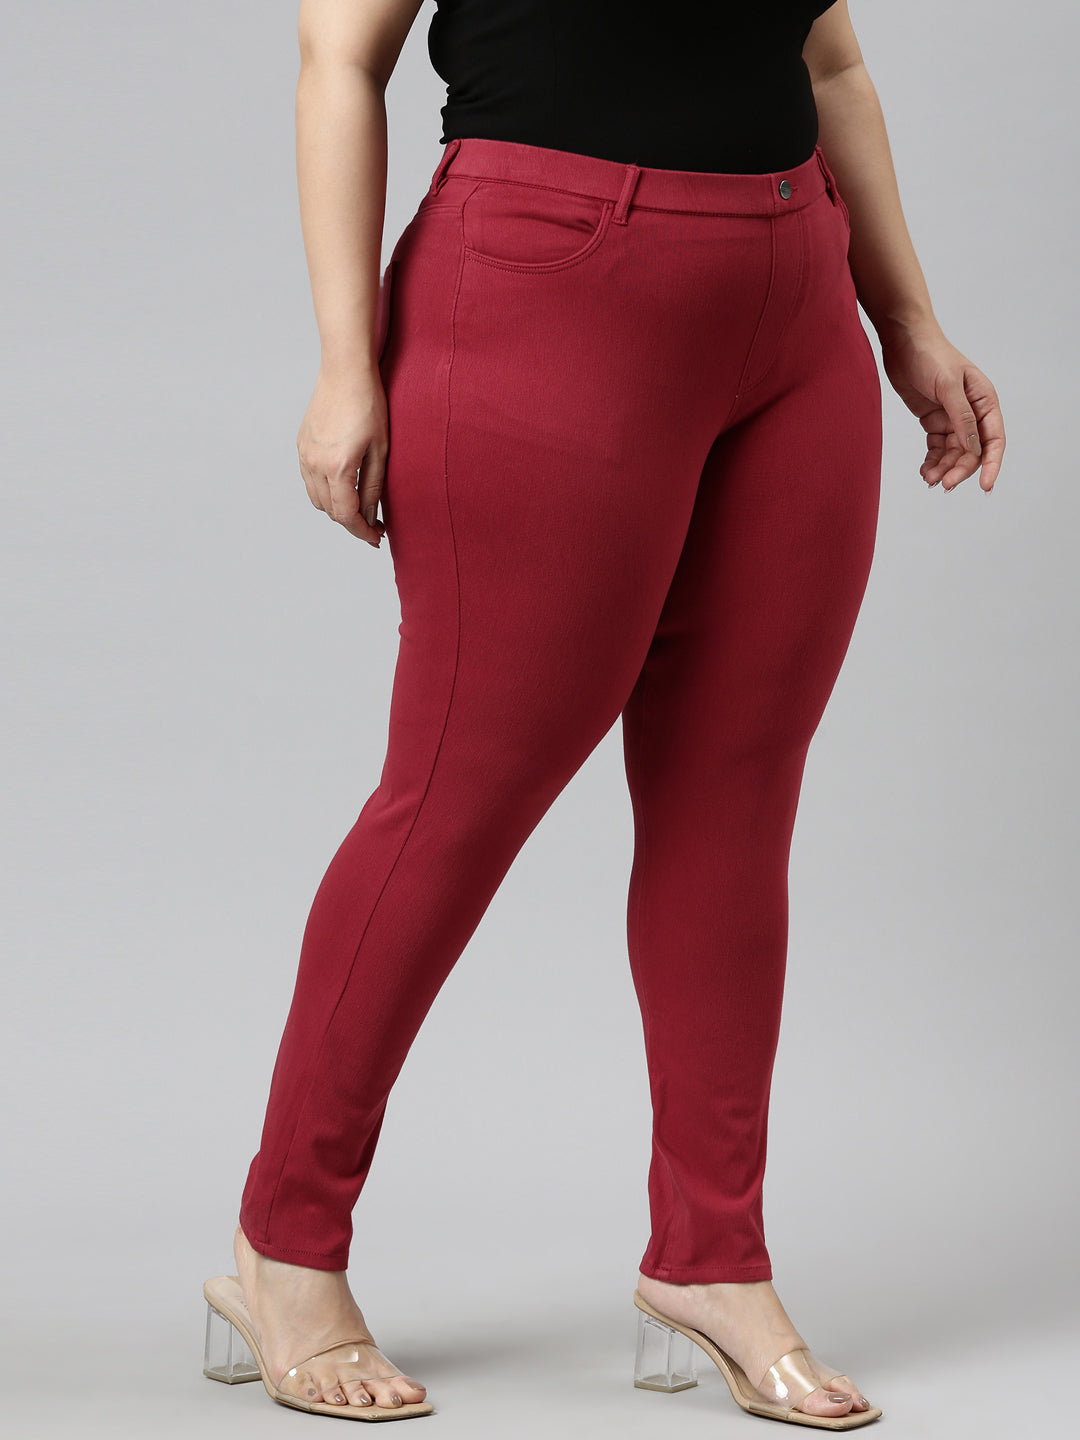 Buy Dark Red Jeans & Jeggings for Girls by Go Colors Online